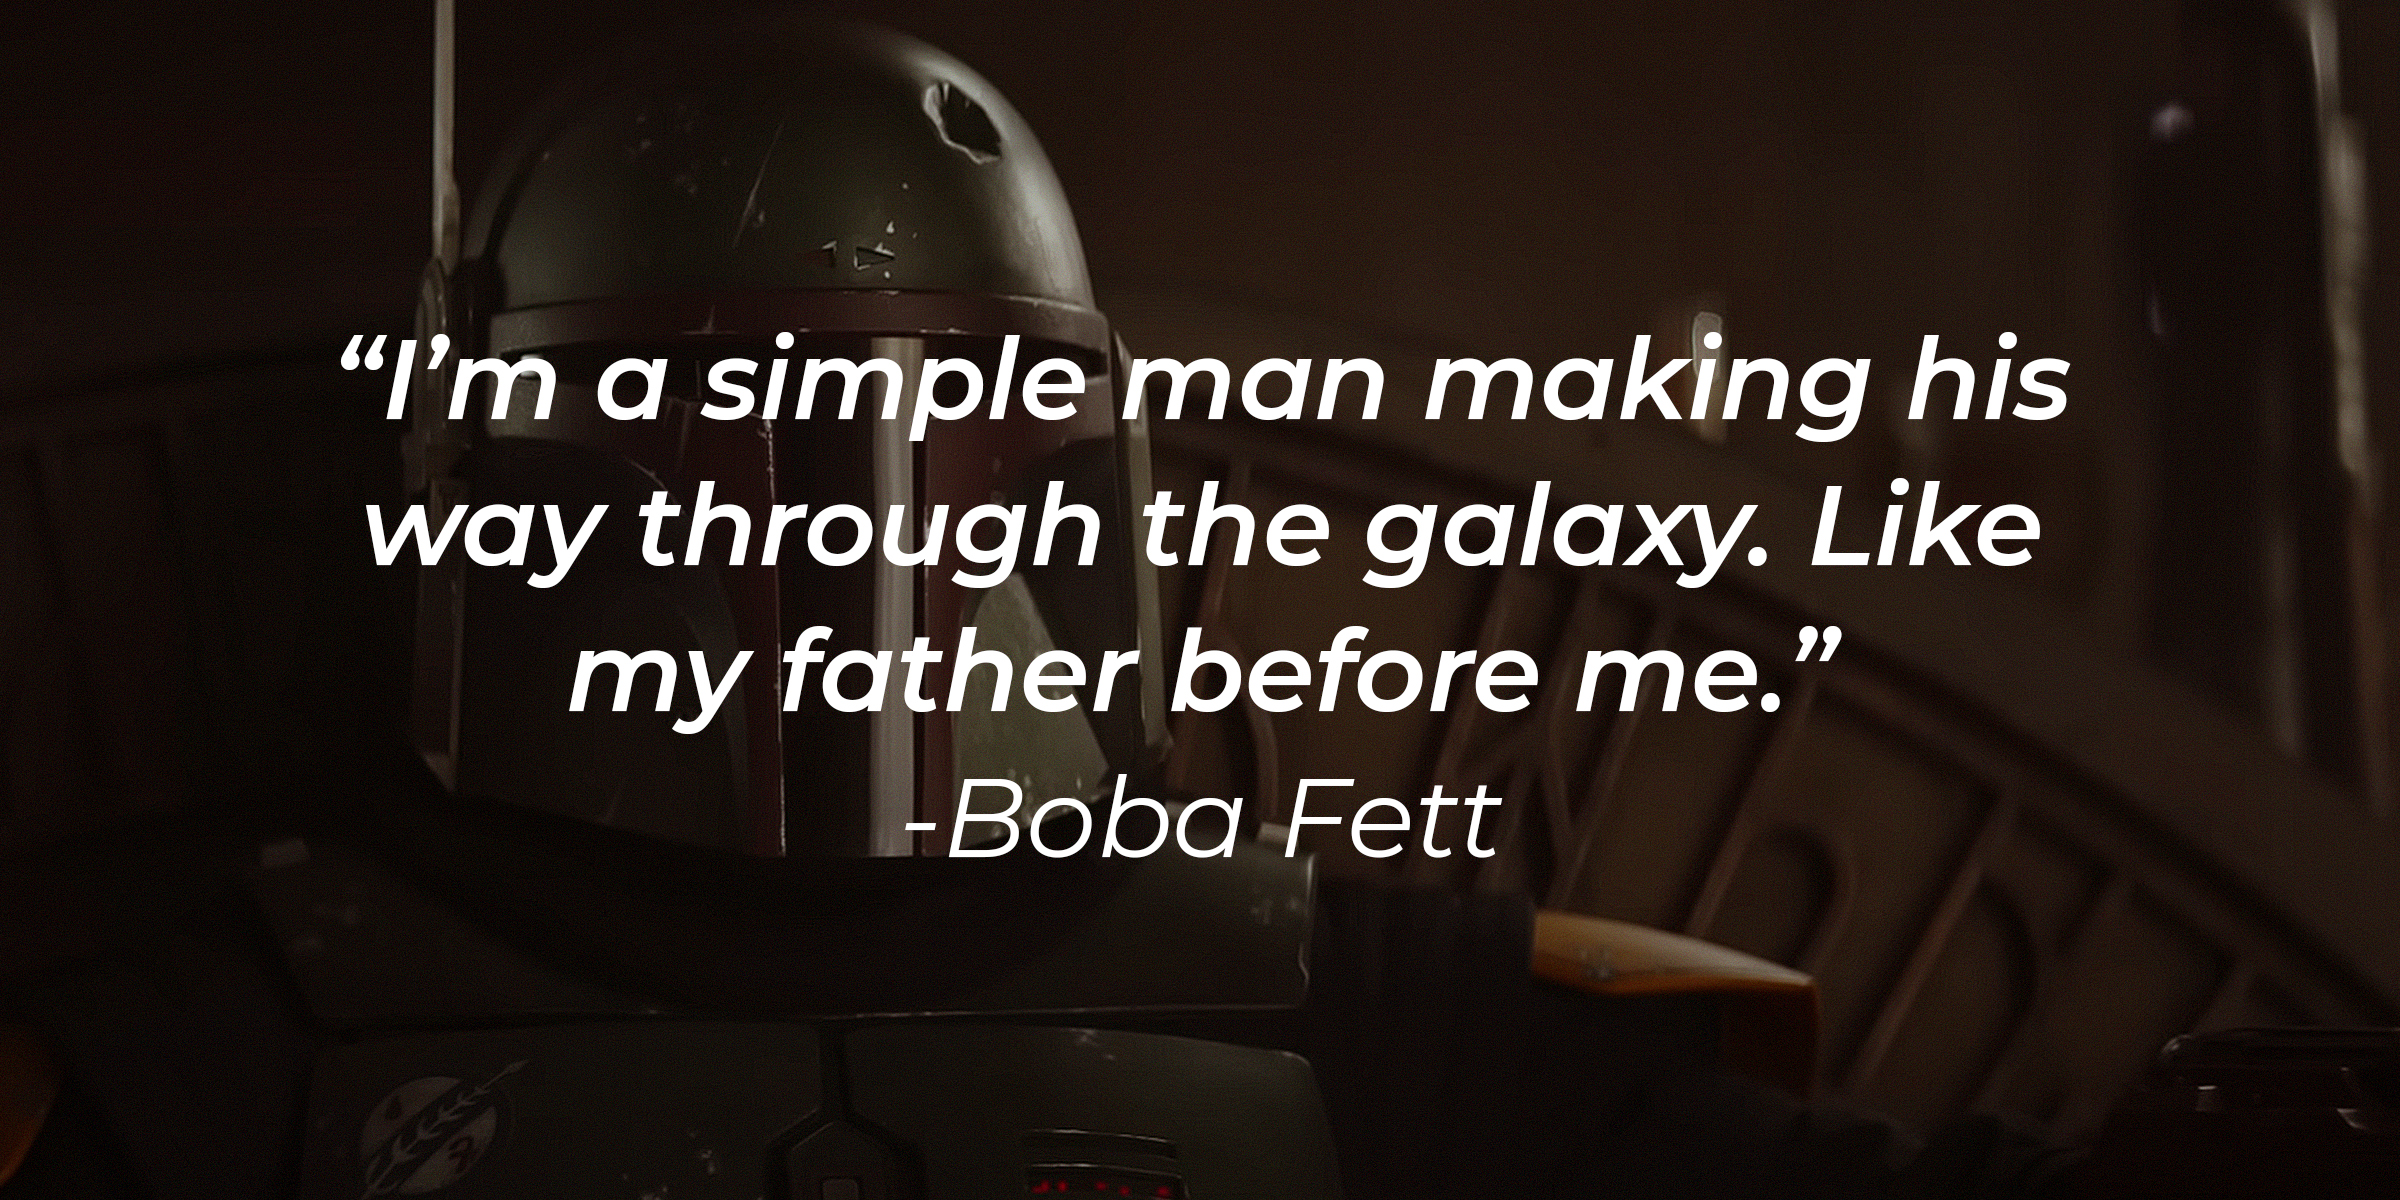 Boba Fett, with his quote: “I’m a simple man making his way through the galaxy. Like my father before me.” │Source: youtube.com/StarWars